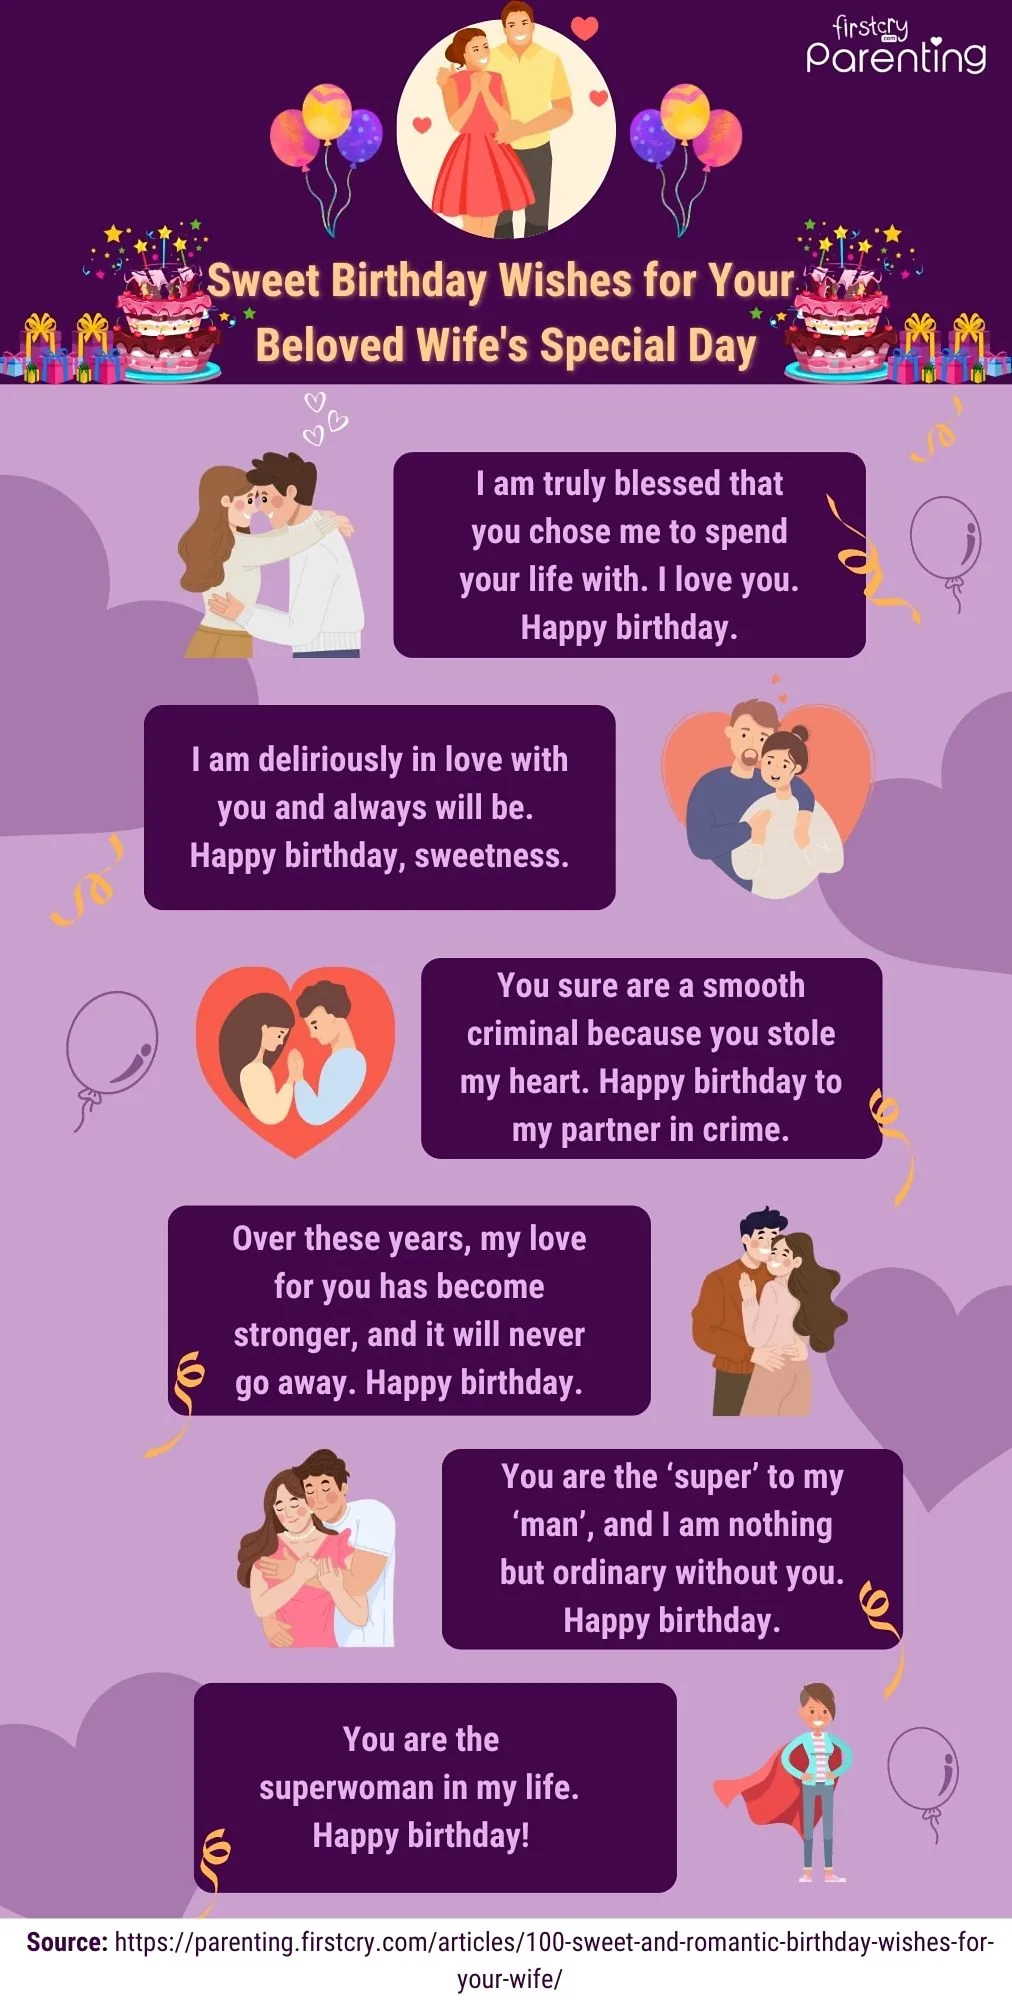 Sweet Birthday Wishes for Your Beloved Wife's Special Day - Infographic